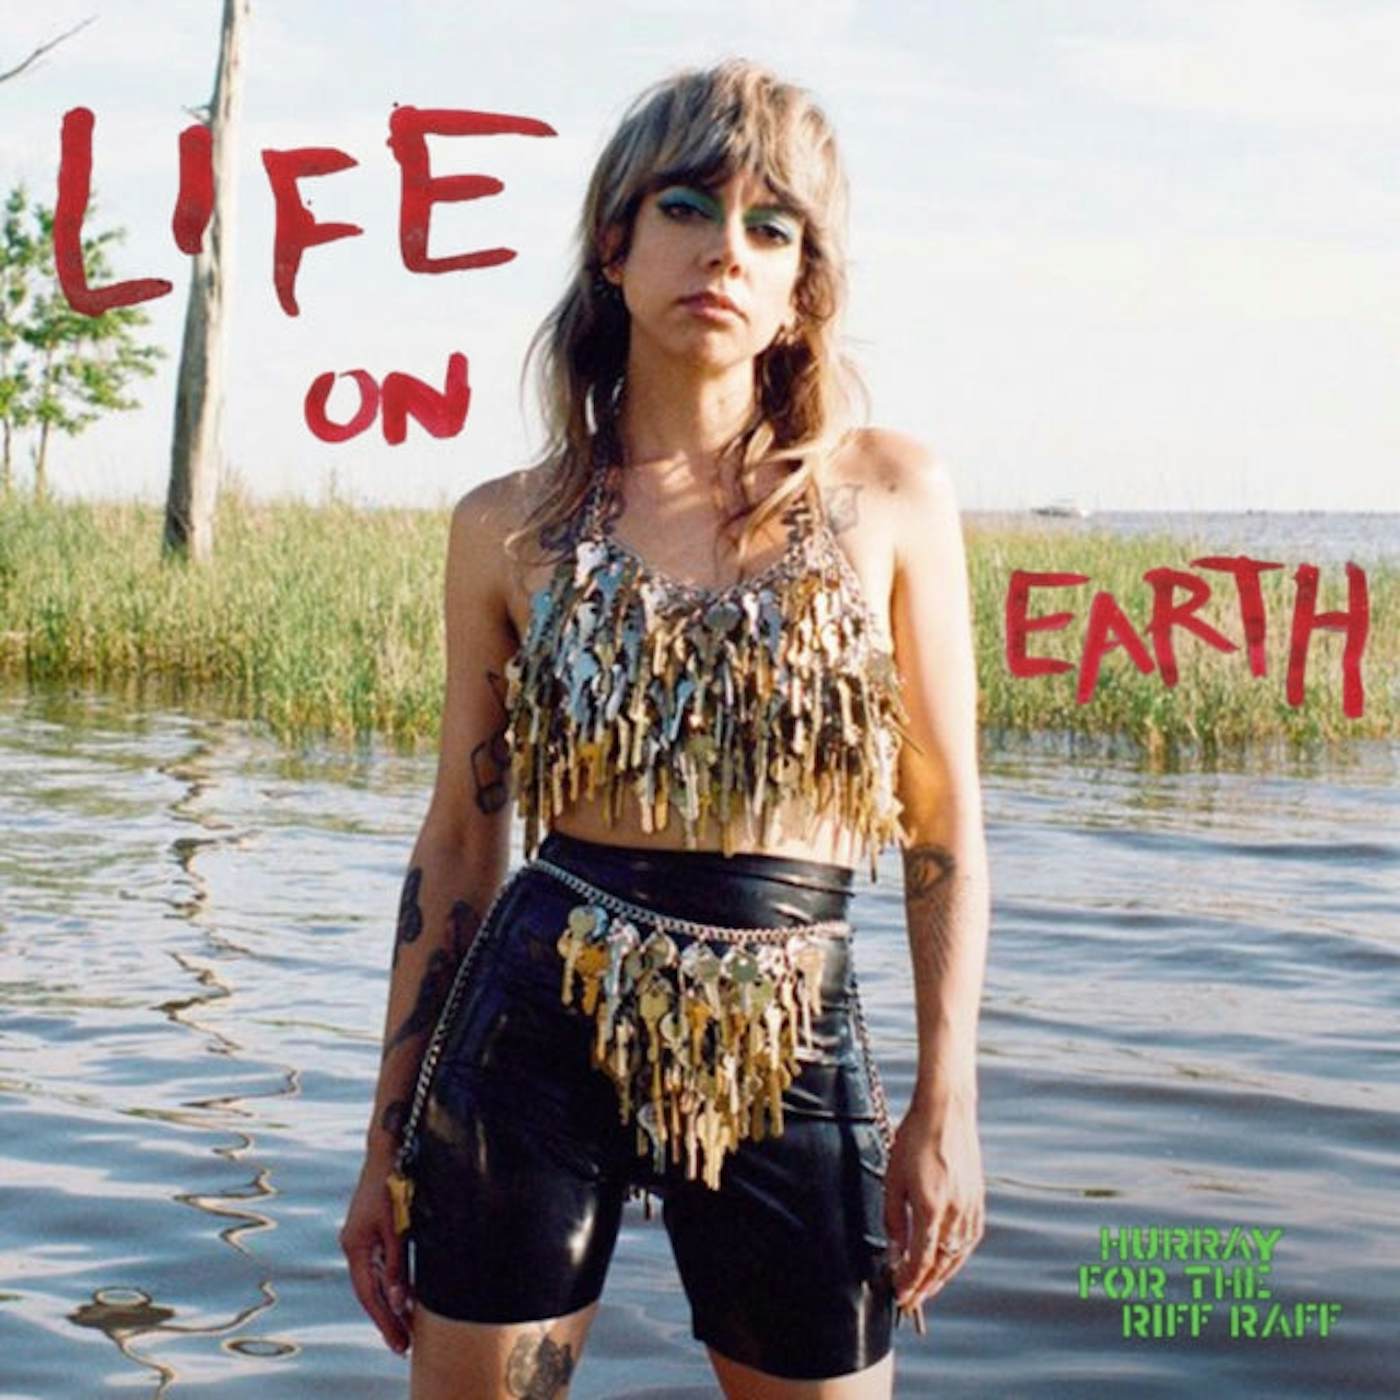 Hurray For The Riff Raff LP - Life On Earth (Vinyl)